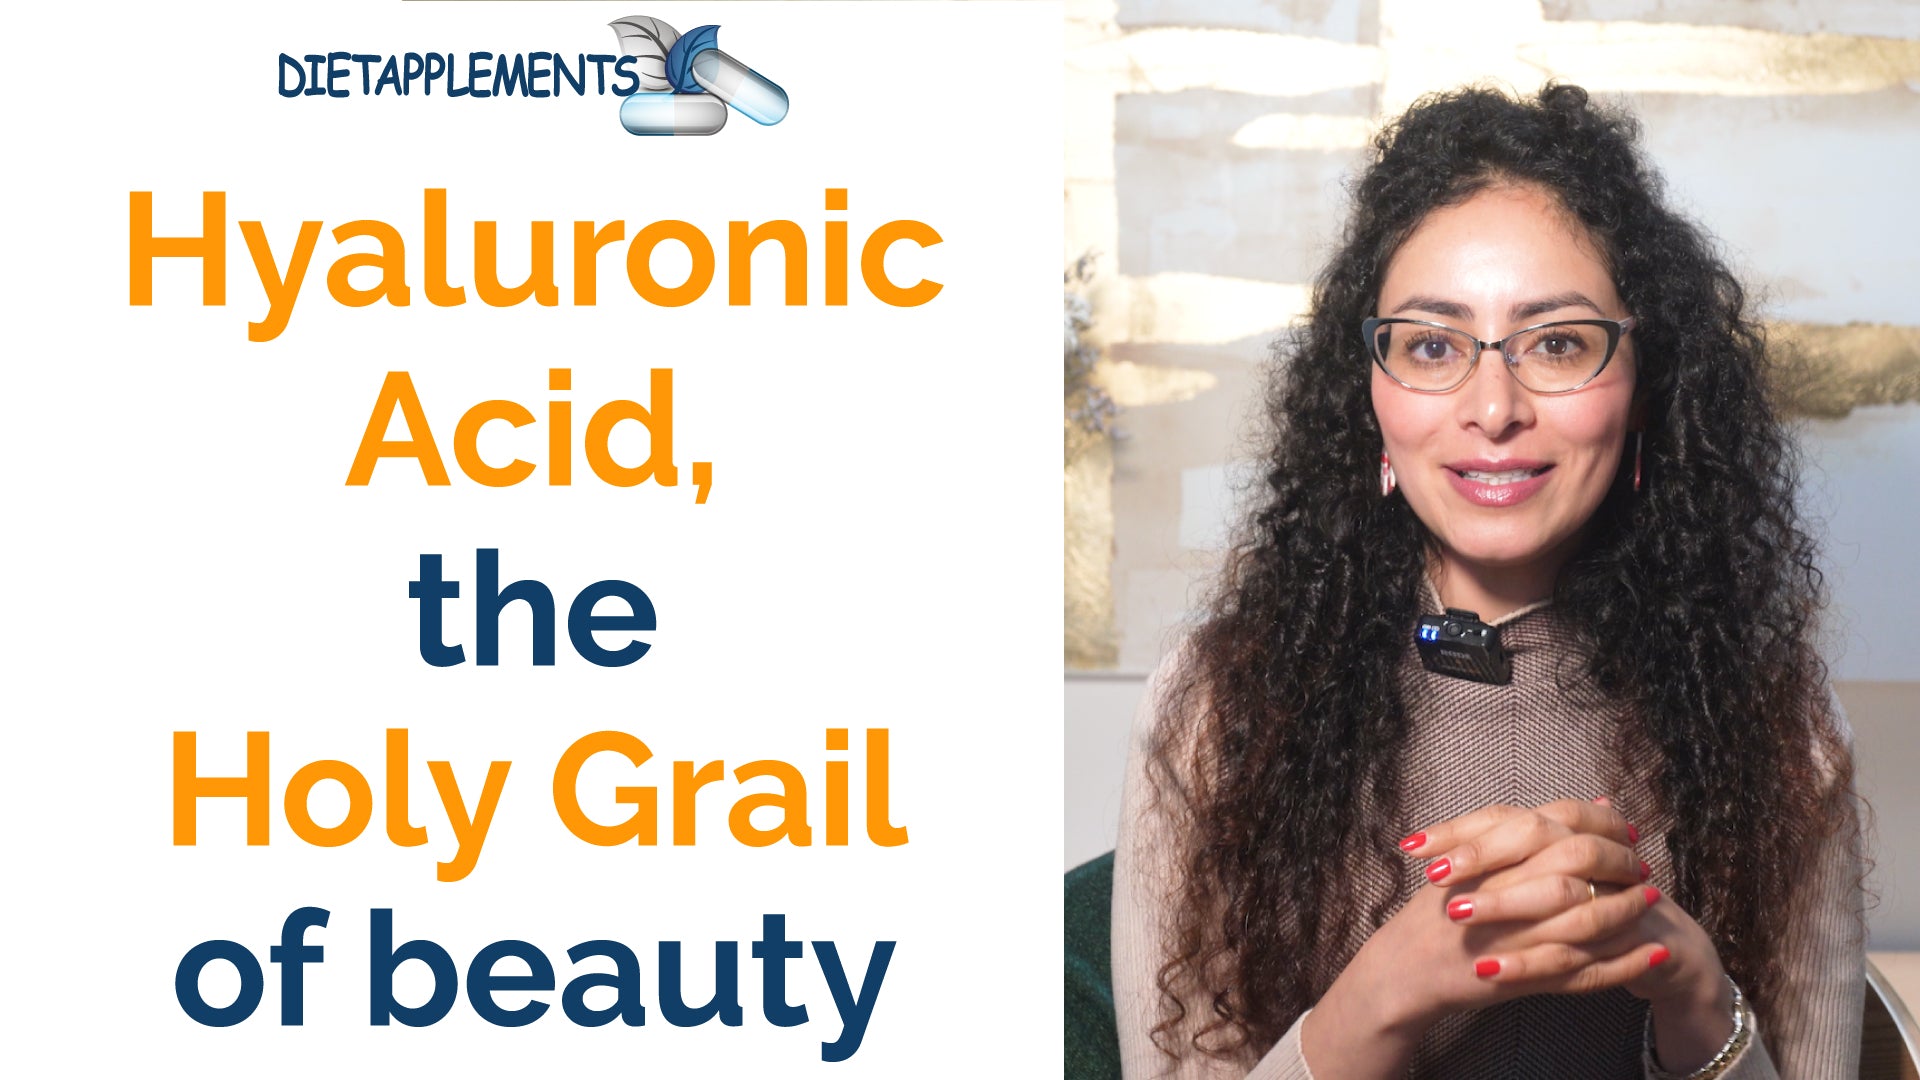 Hyaluronic acid, the Holy Grail of beauty